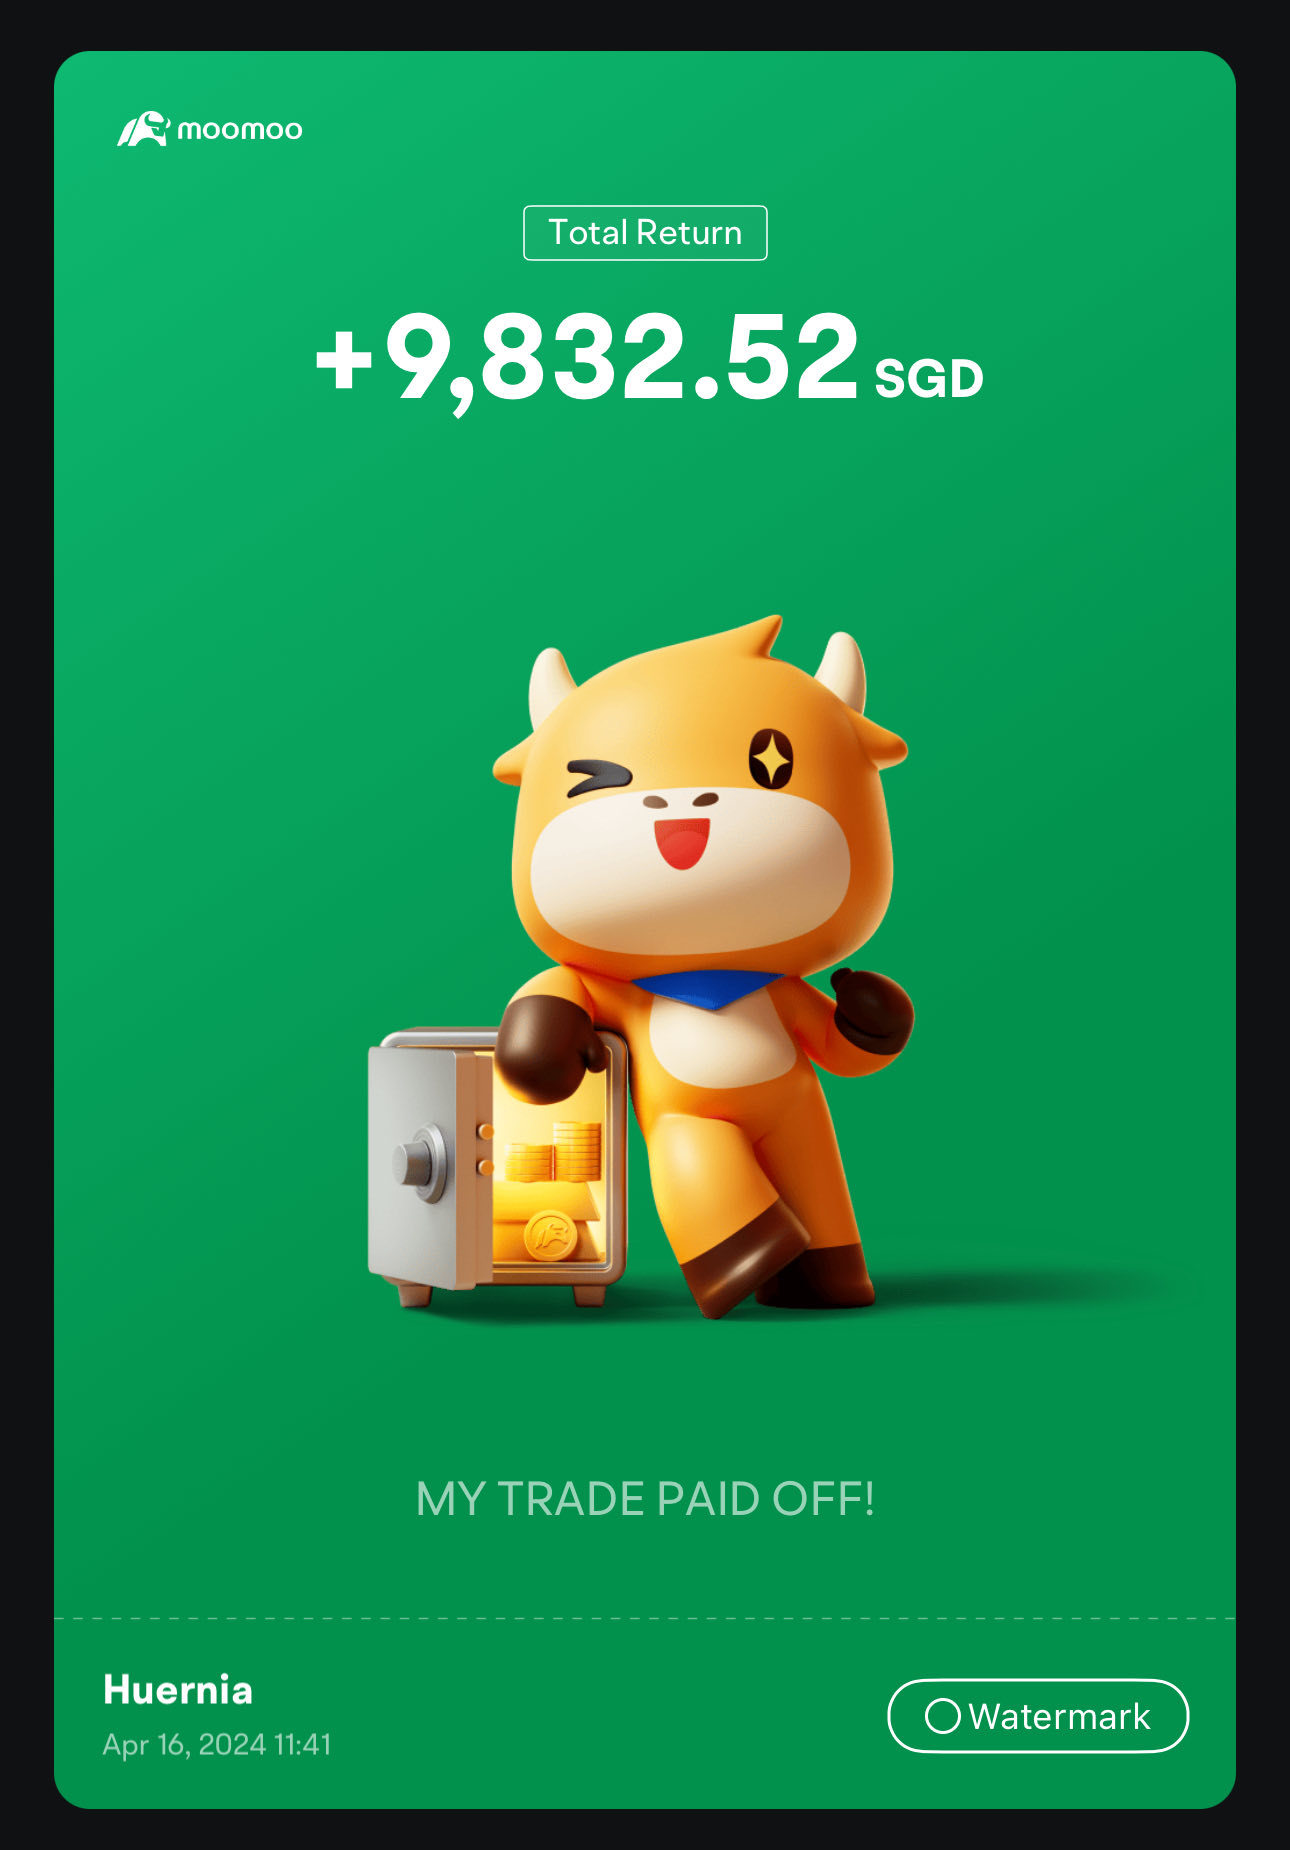 Wow!!! 1 million users! What an amazing feat! 💪🏼 I joined Moomoo in September 2022 when my friend “jio” me for the moomoo promotion. Great earning from Fuller...